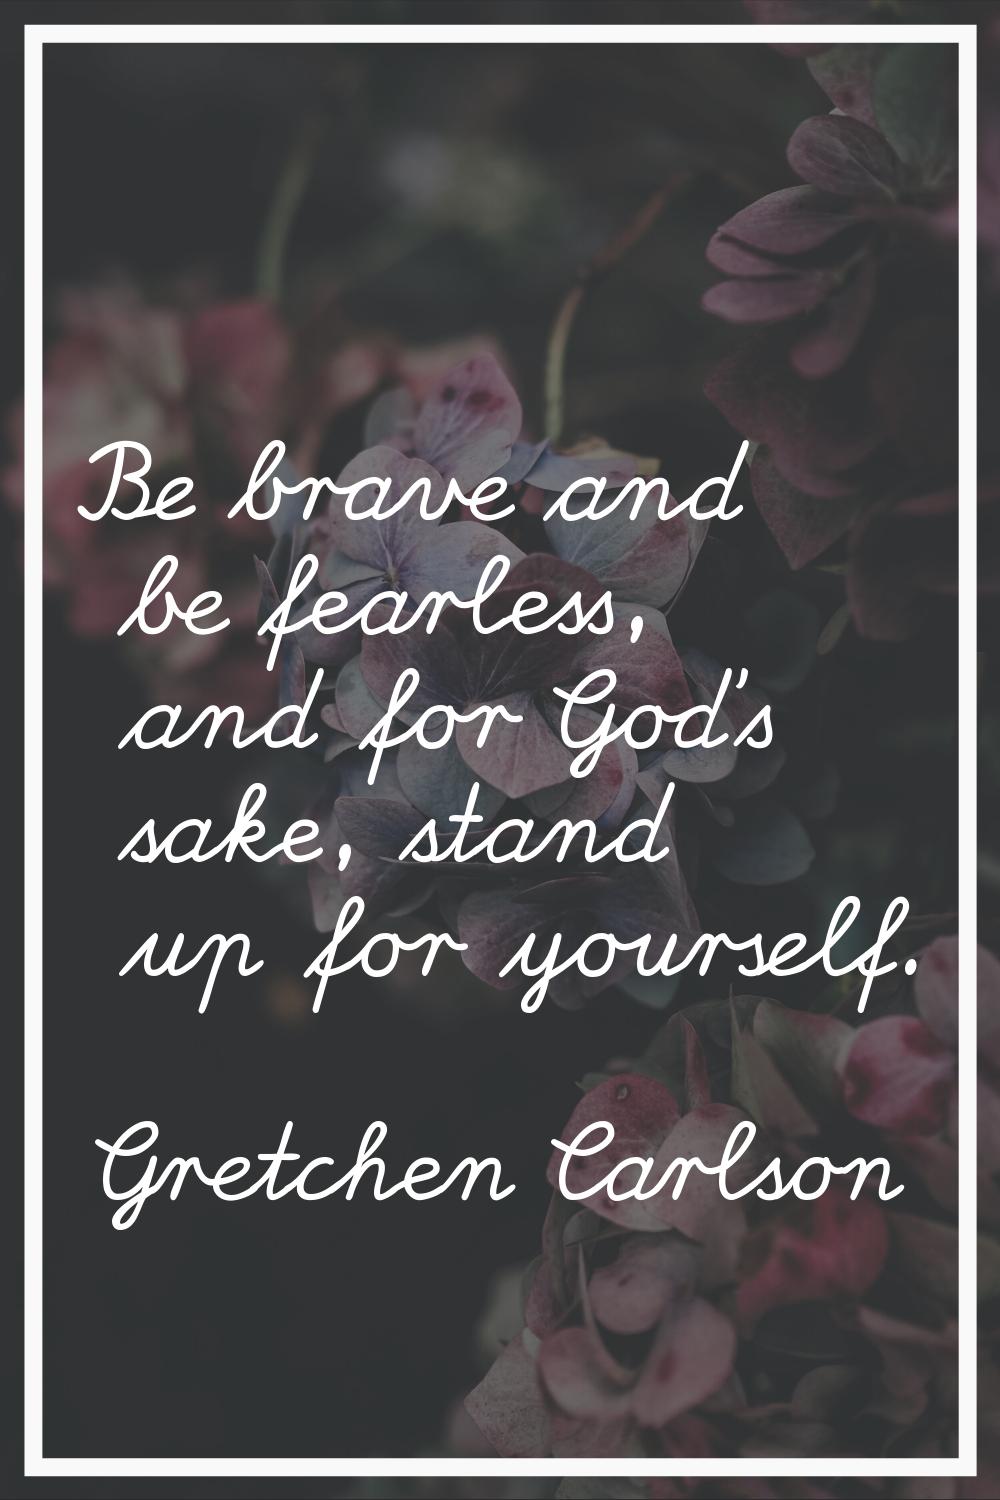 Be brave and be fearless, and for God's sake, stand up for yourself.